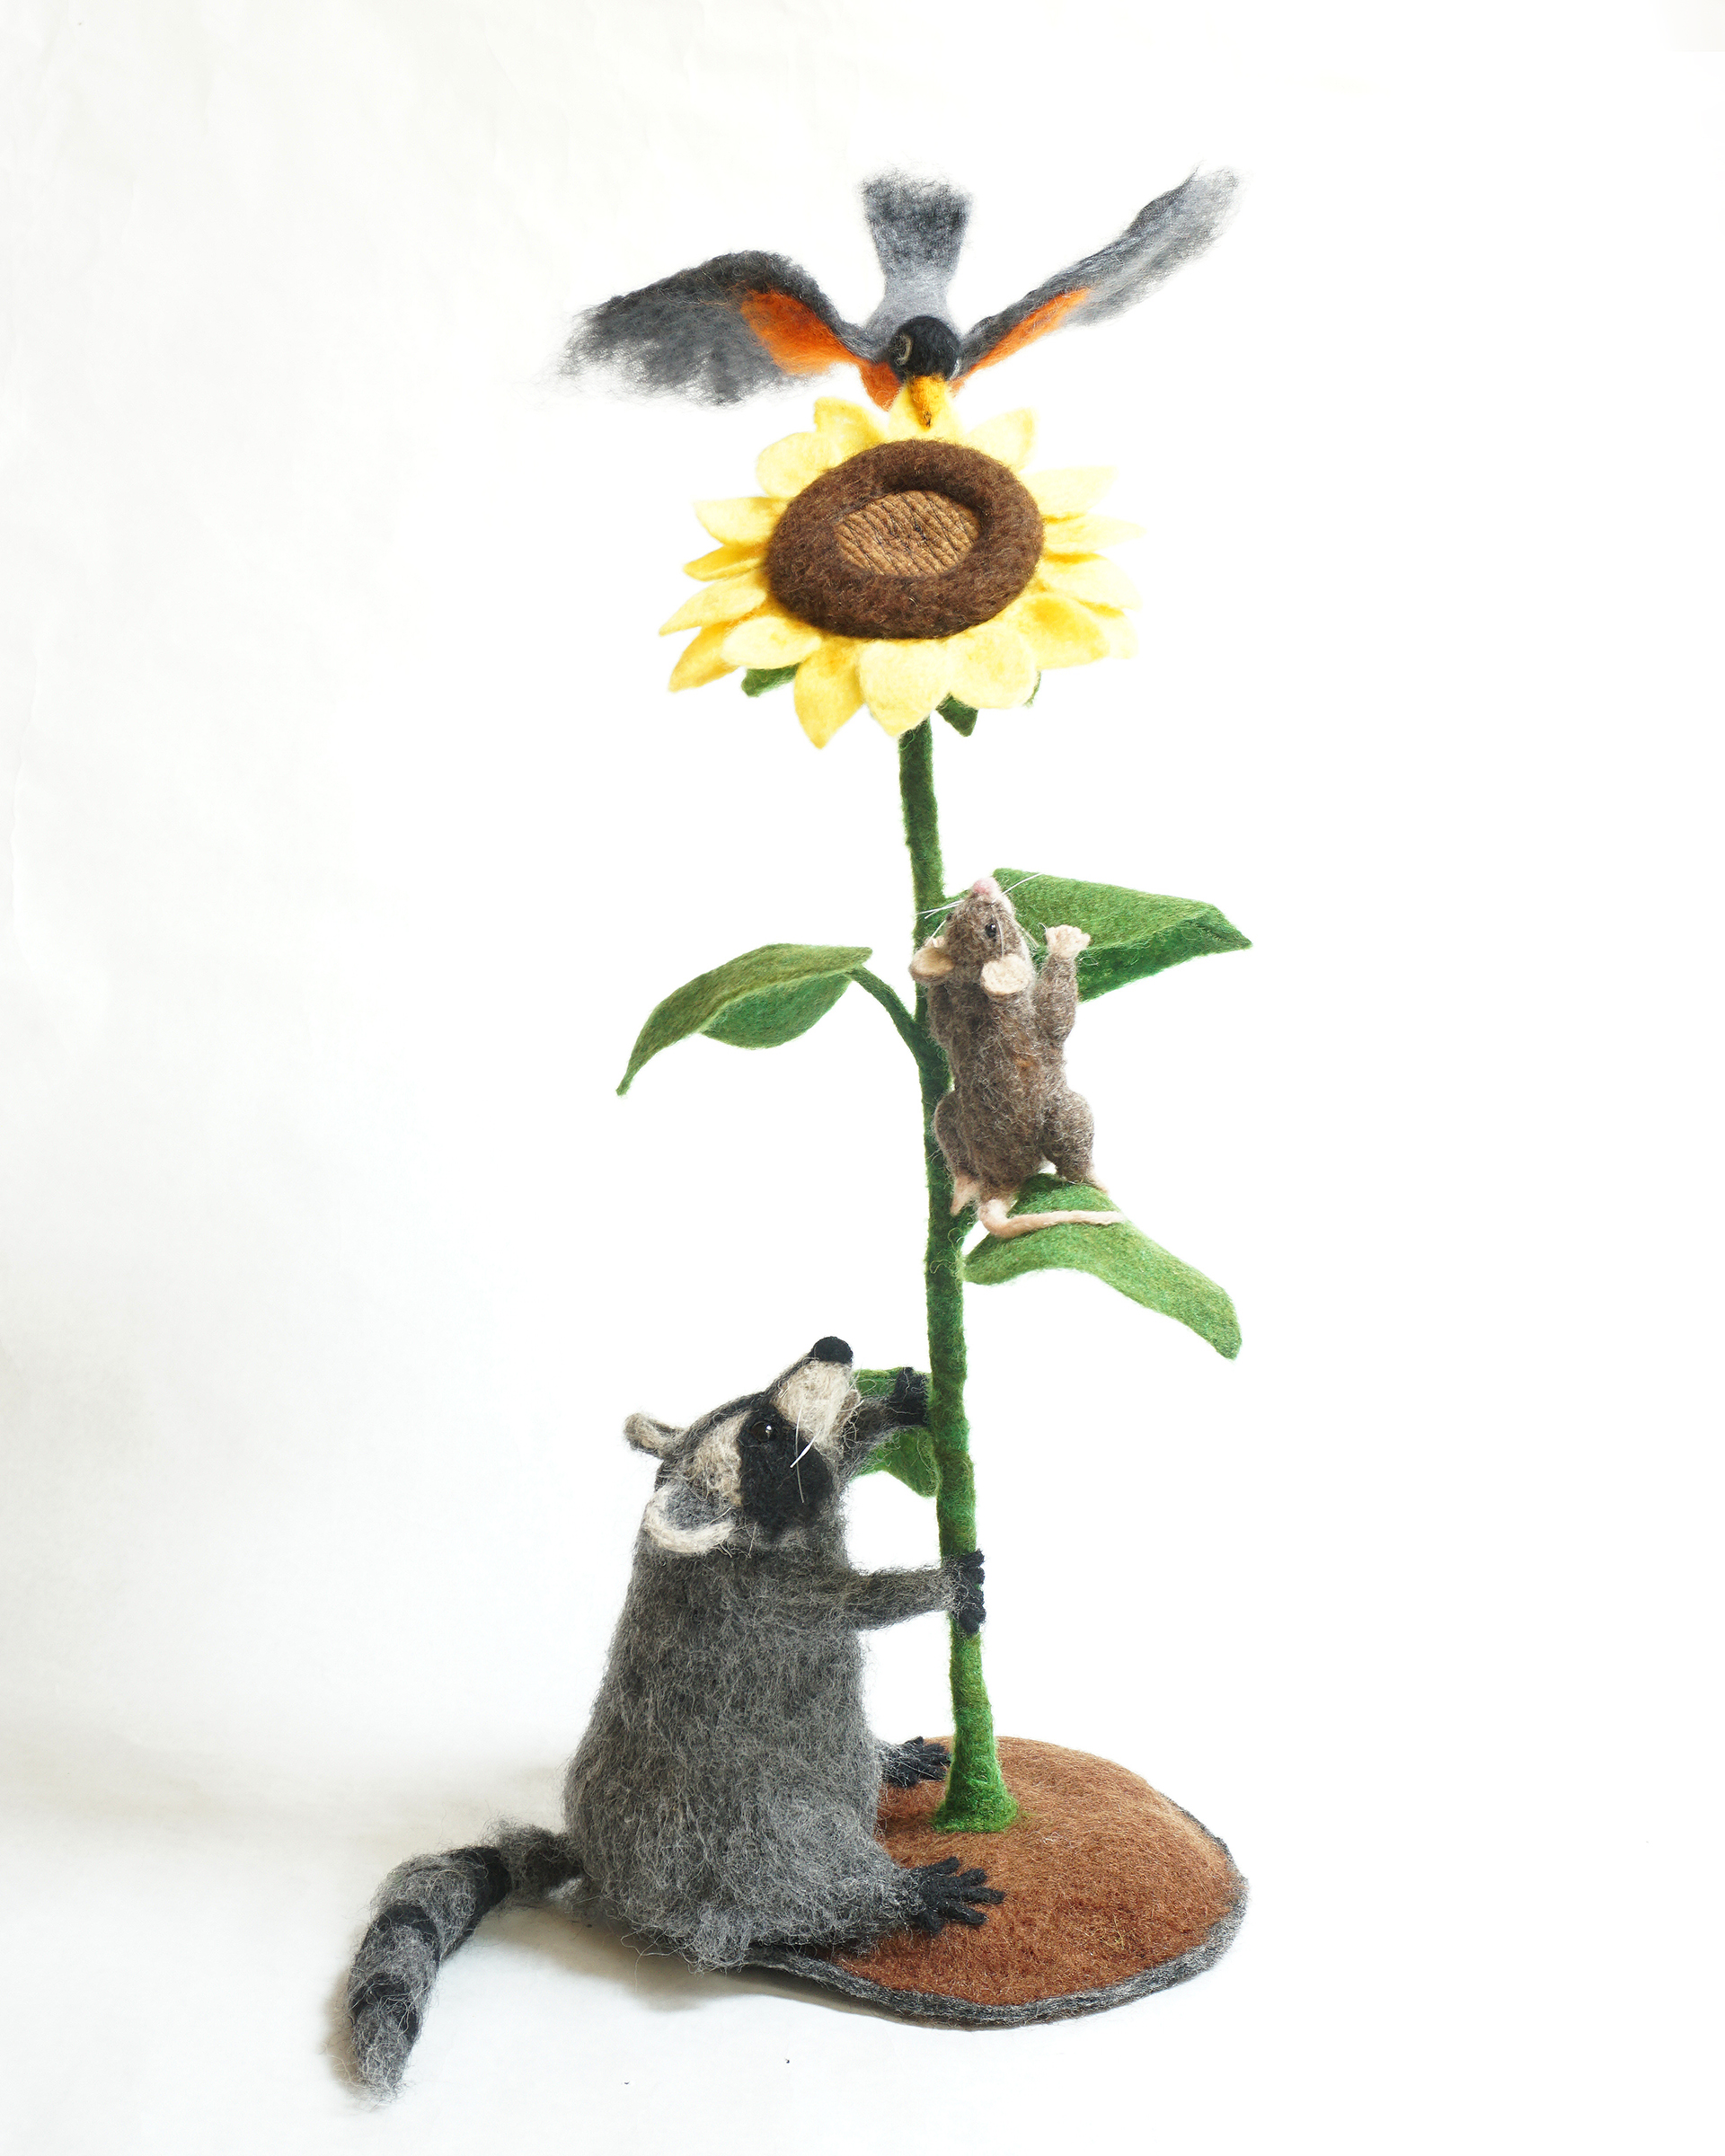 Helping Sunflower is needle felted wool sculpture over a wire and quilt batting armature form. Anthropomorphic raccoon, mouse and robin work together to help a sunflower